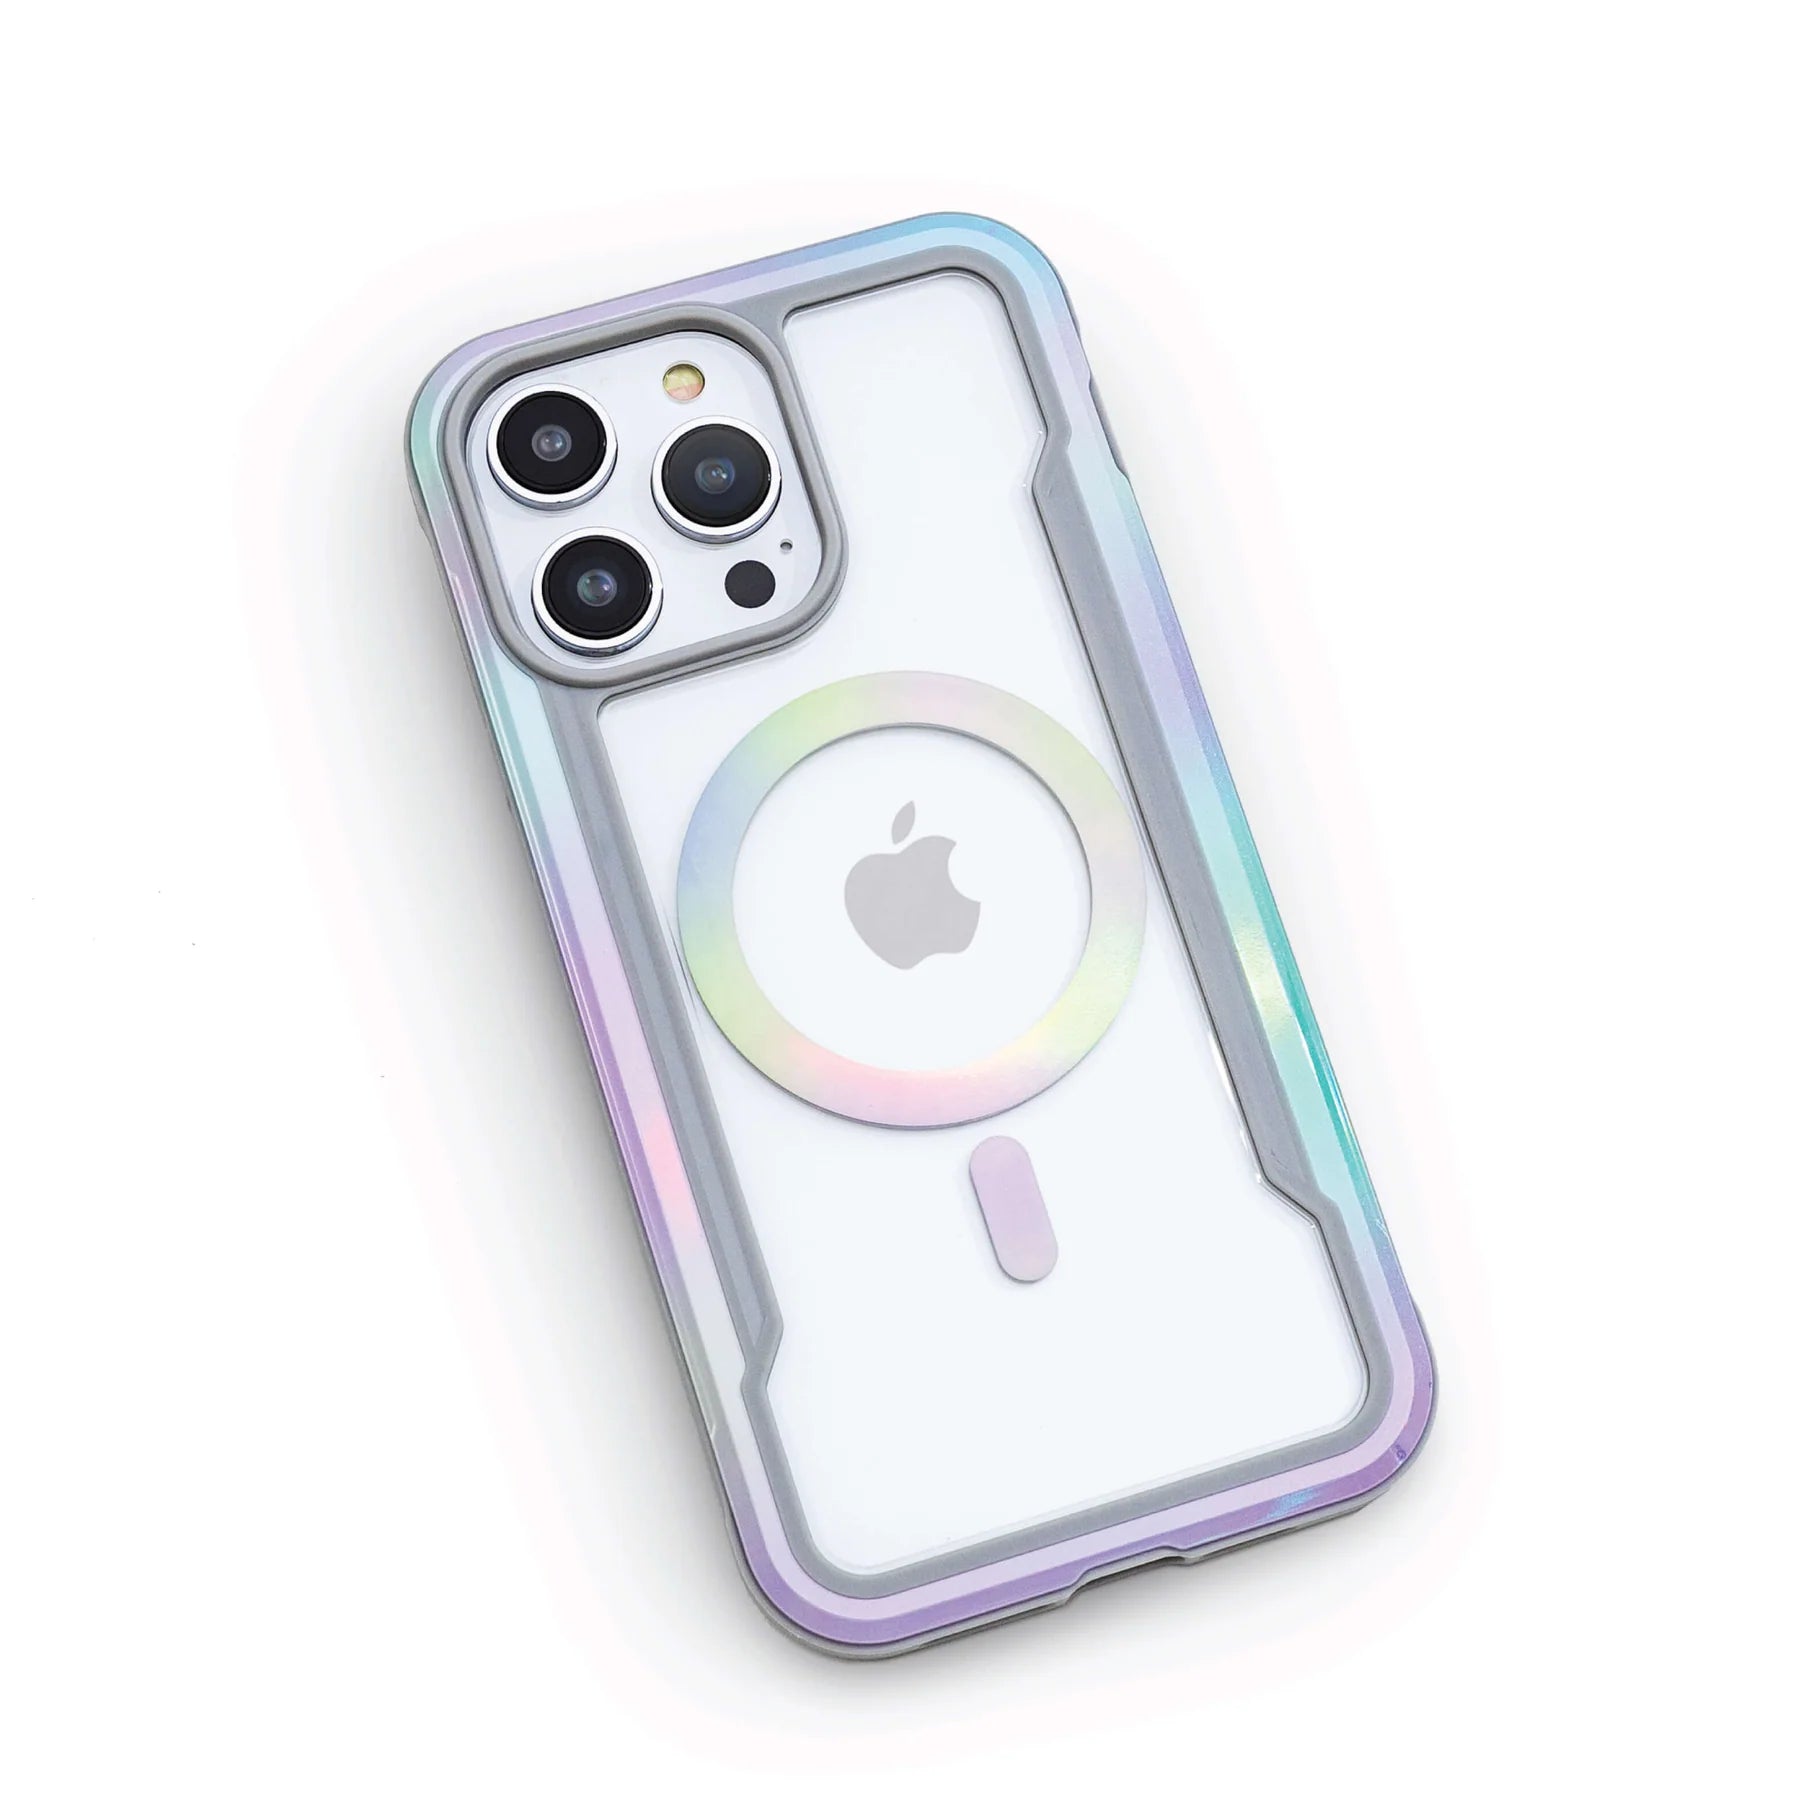 Sentence with product name and brand name: iPhone 15 Shield MagSafe Case - Shield 2.0 in a clear Raptic case with an apple logo and a circular rainbow design, showcasing three camera lenses.